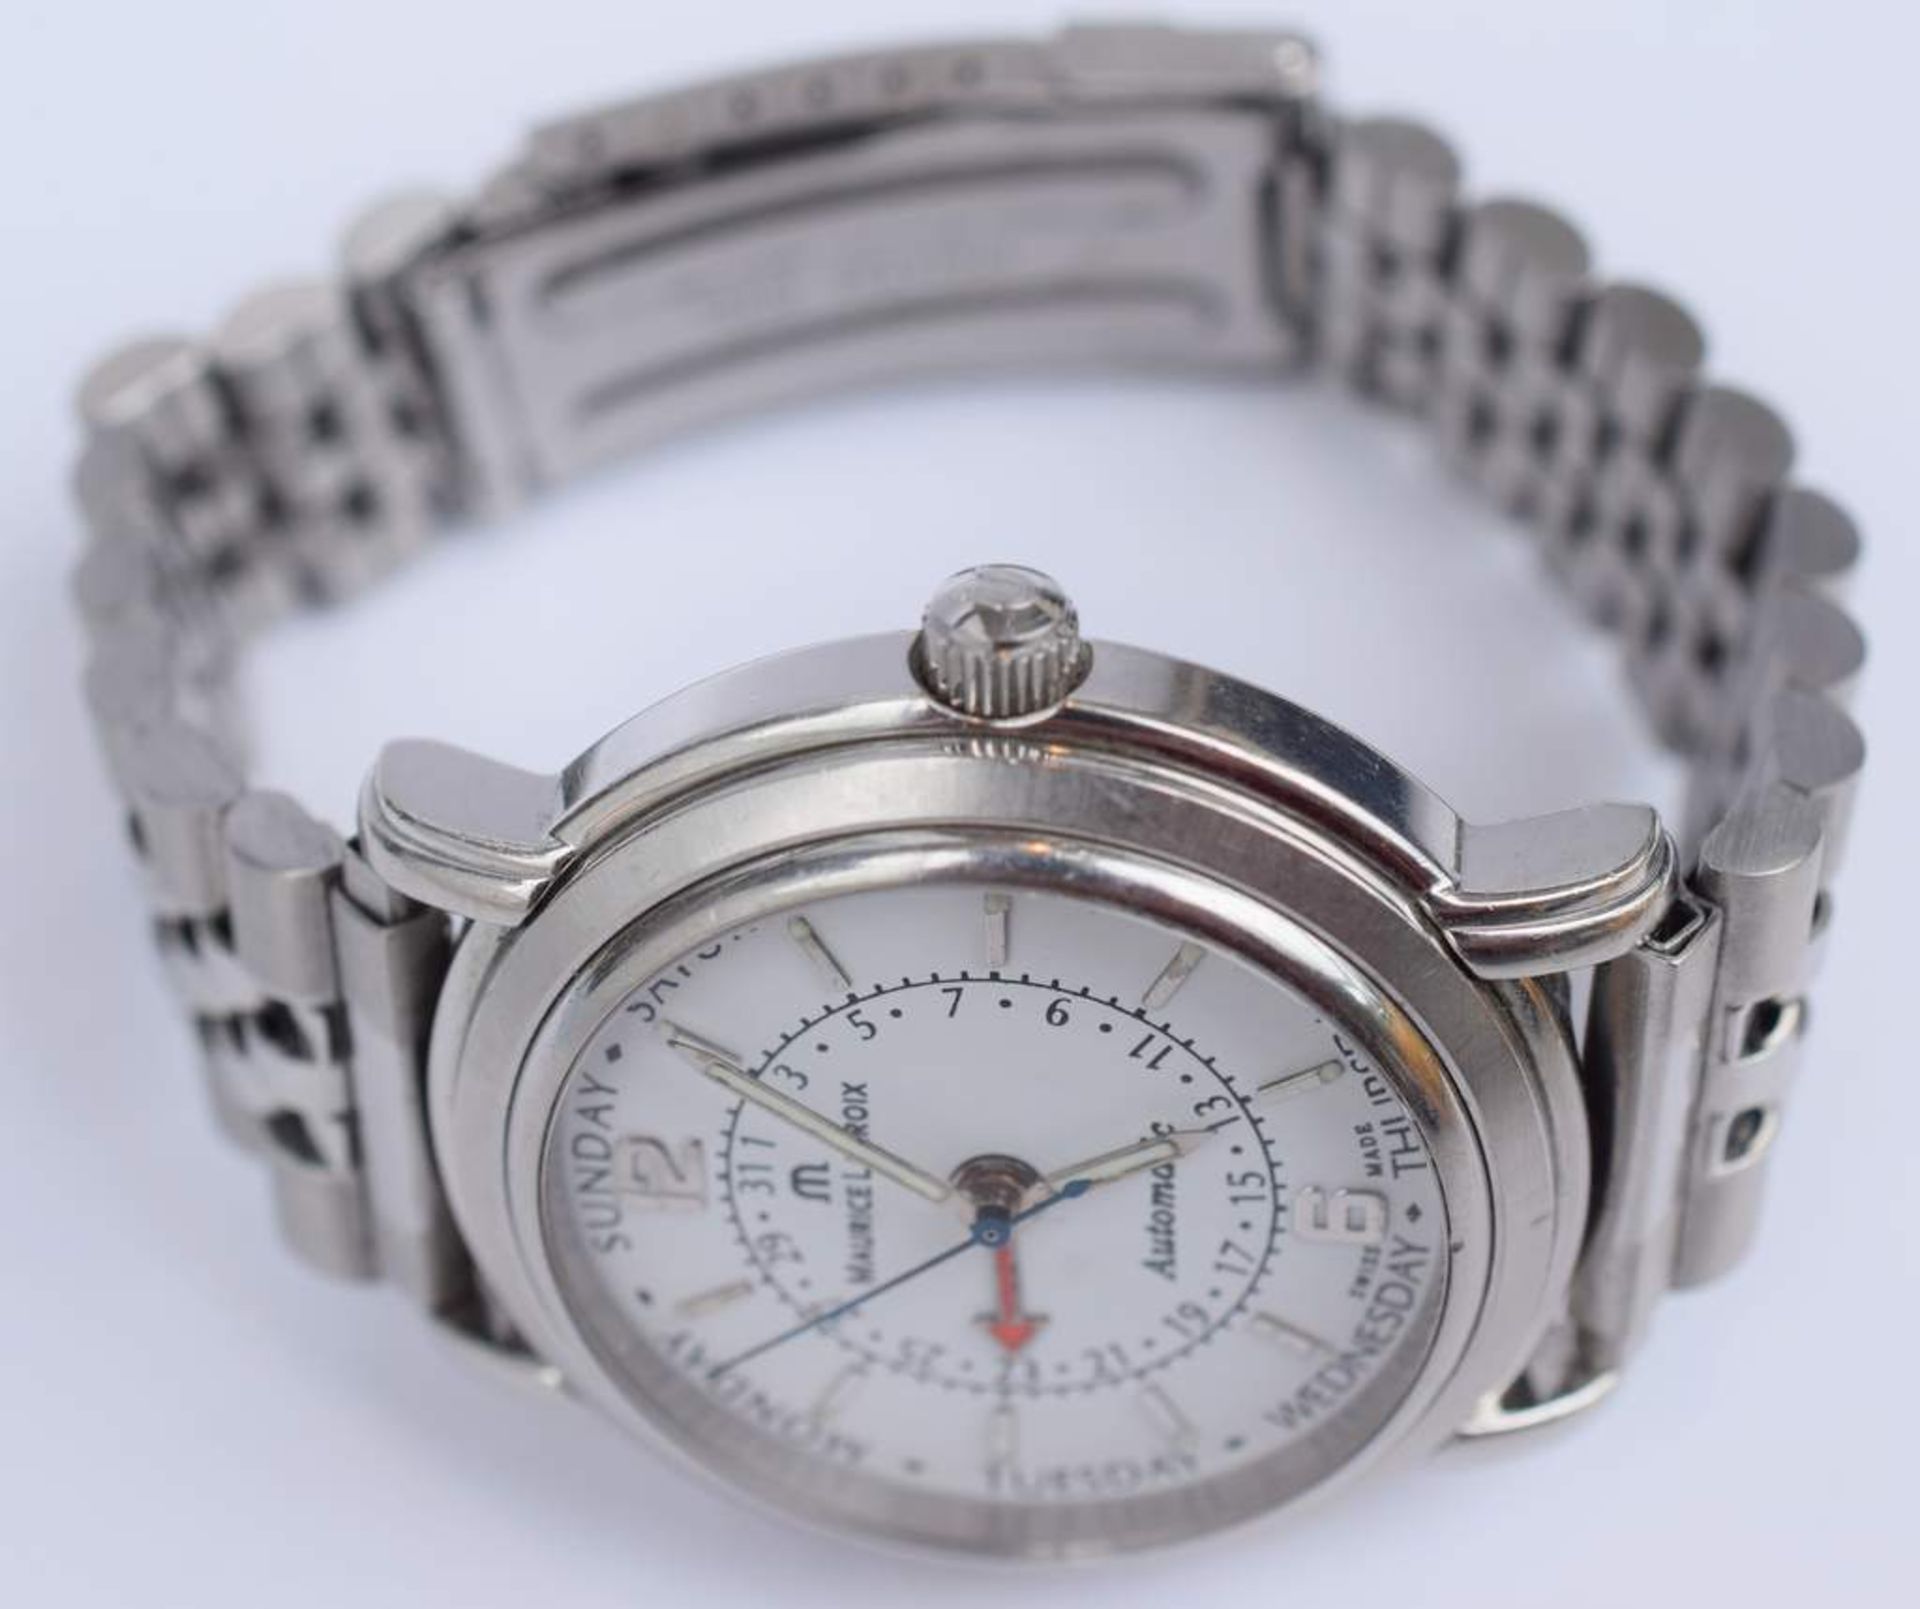 Maurice Lacroix Masterpiece Chronograph - Image 3 of 4